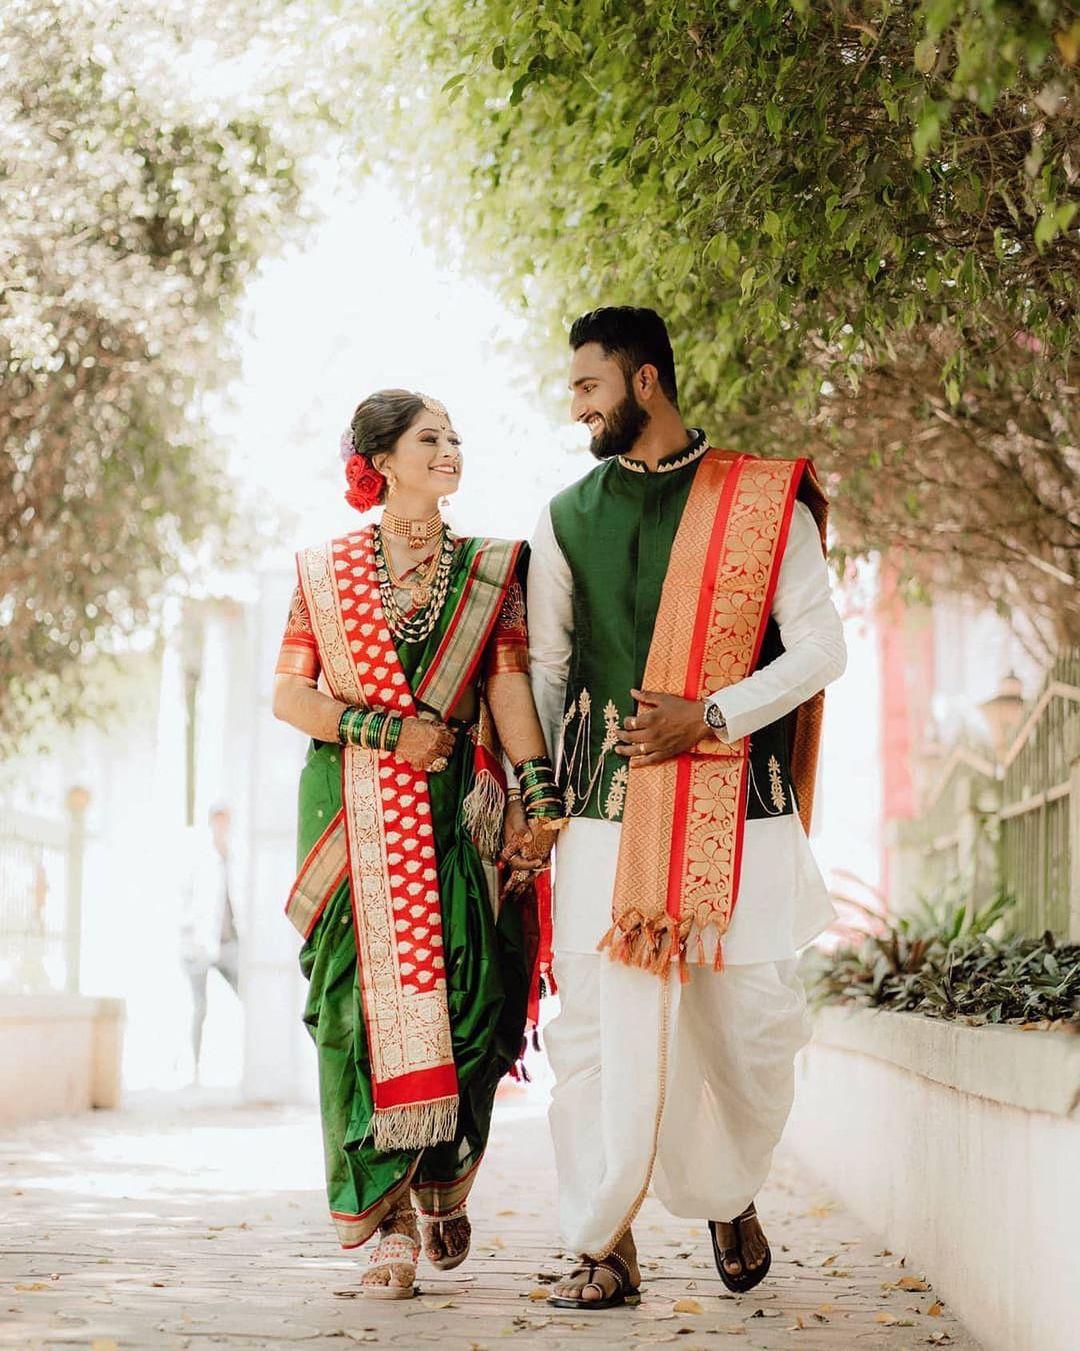 Color Red Significance in a Hindu Wedding | CrystalView Weddings